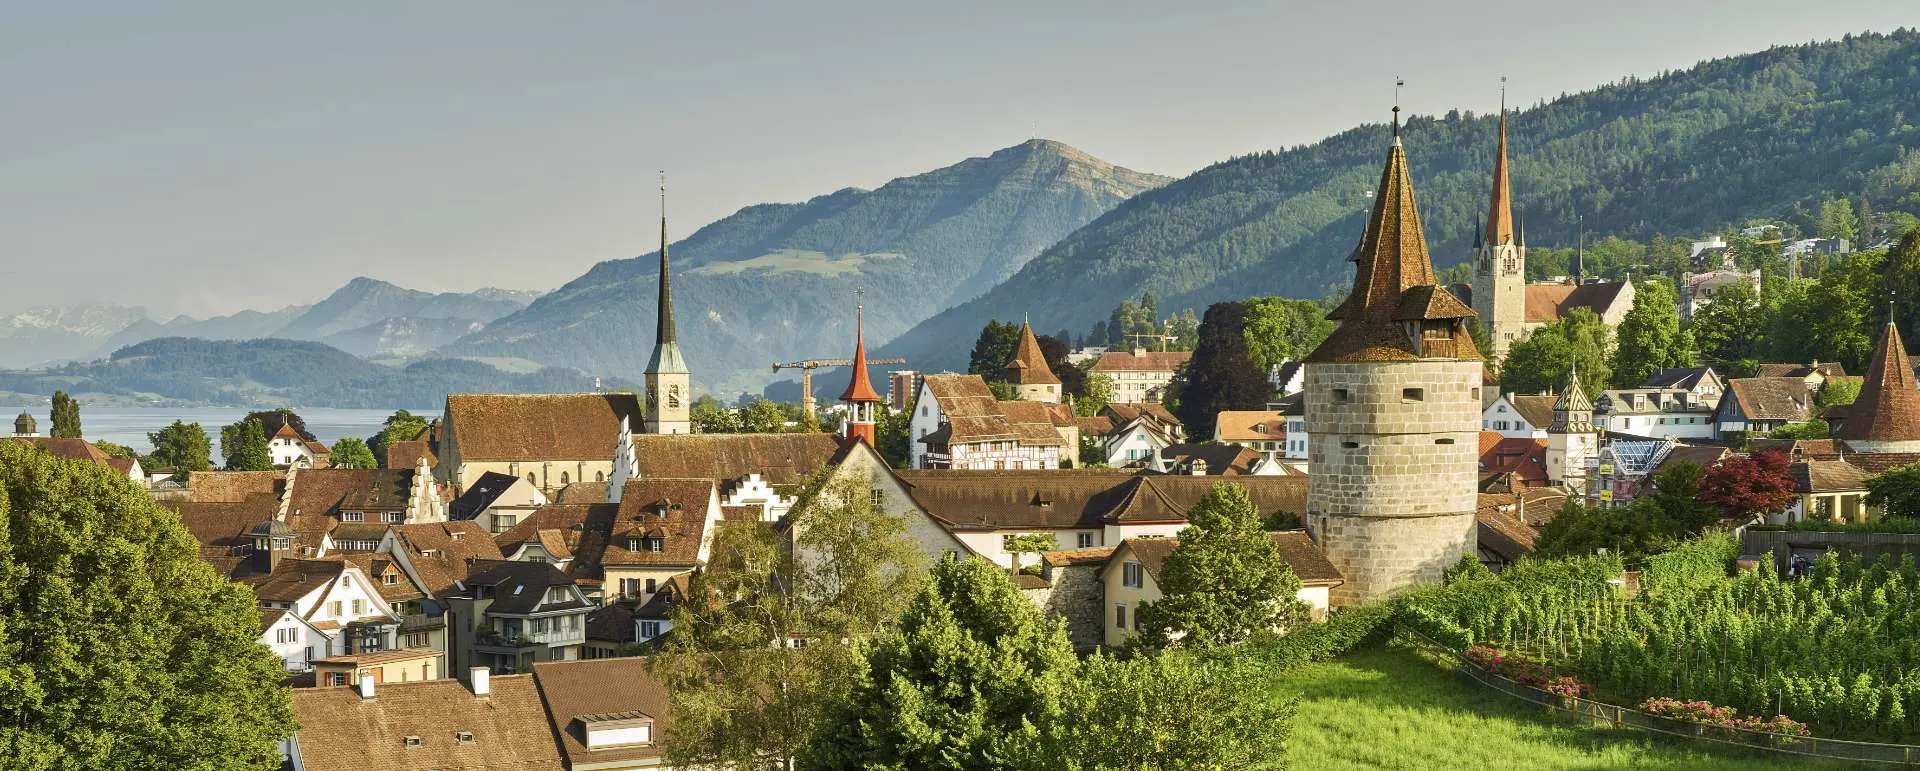 Zug - the destination for families